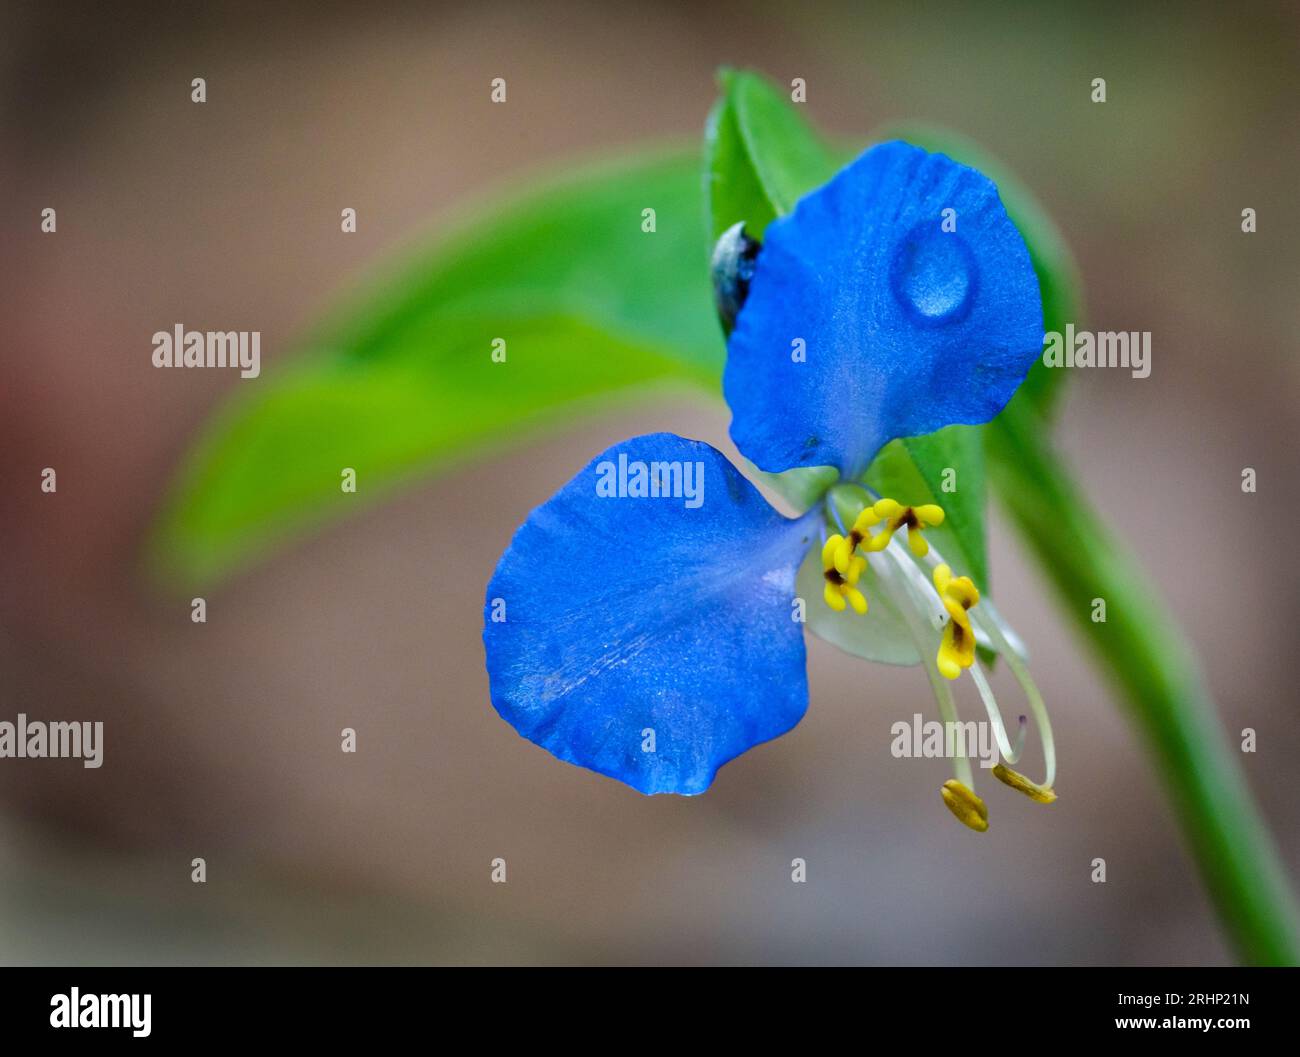 Asiatic dayflower (Commelina communis) - Hall County, Georgia. The small and intricate bloom of a day flower. Stock Photo